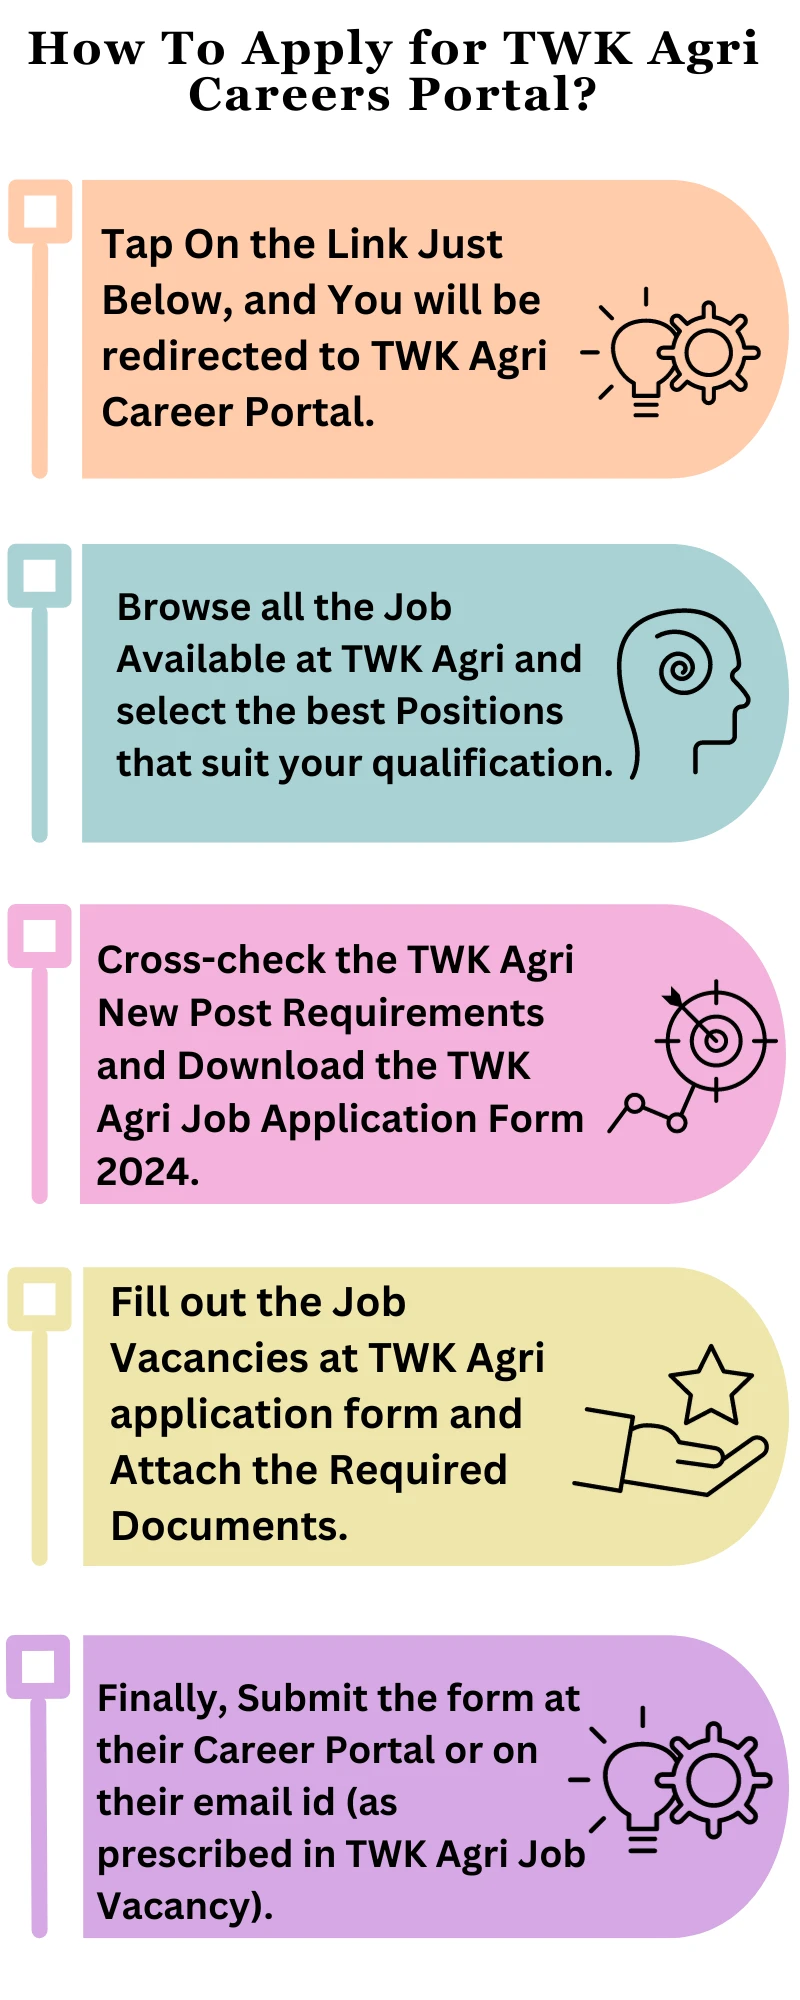 How To Apply for TWK Agri Careers Portal?